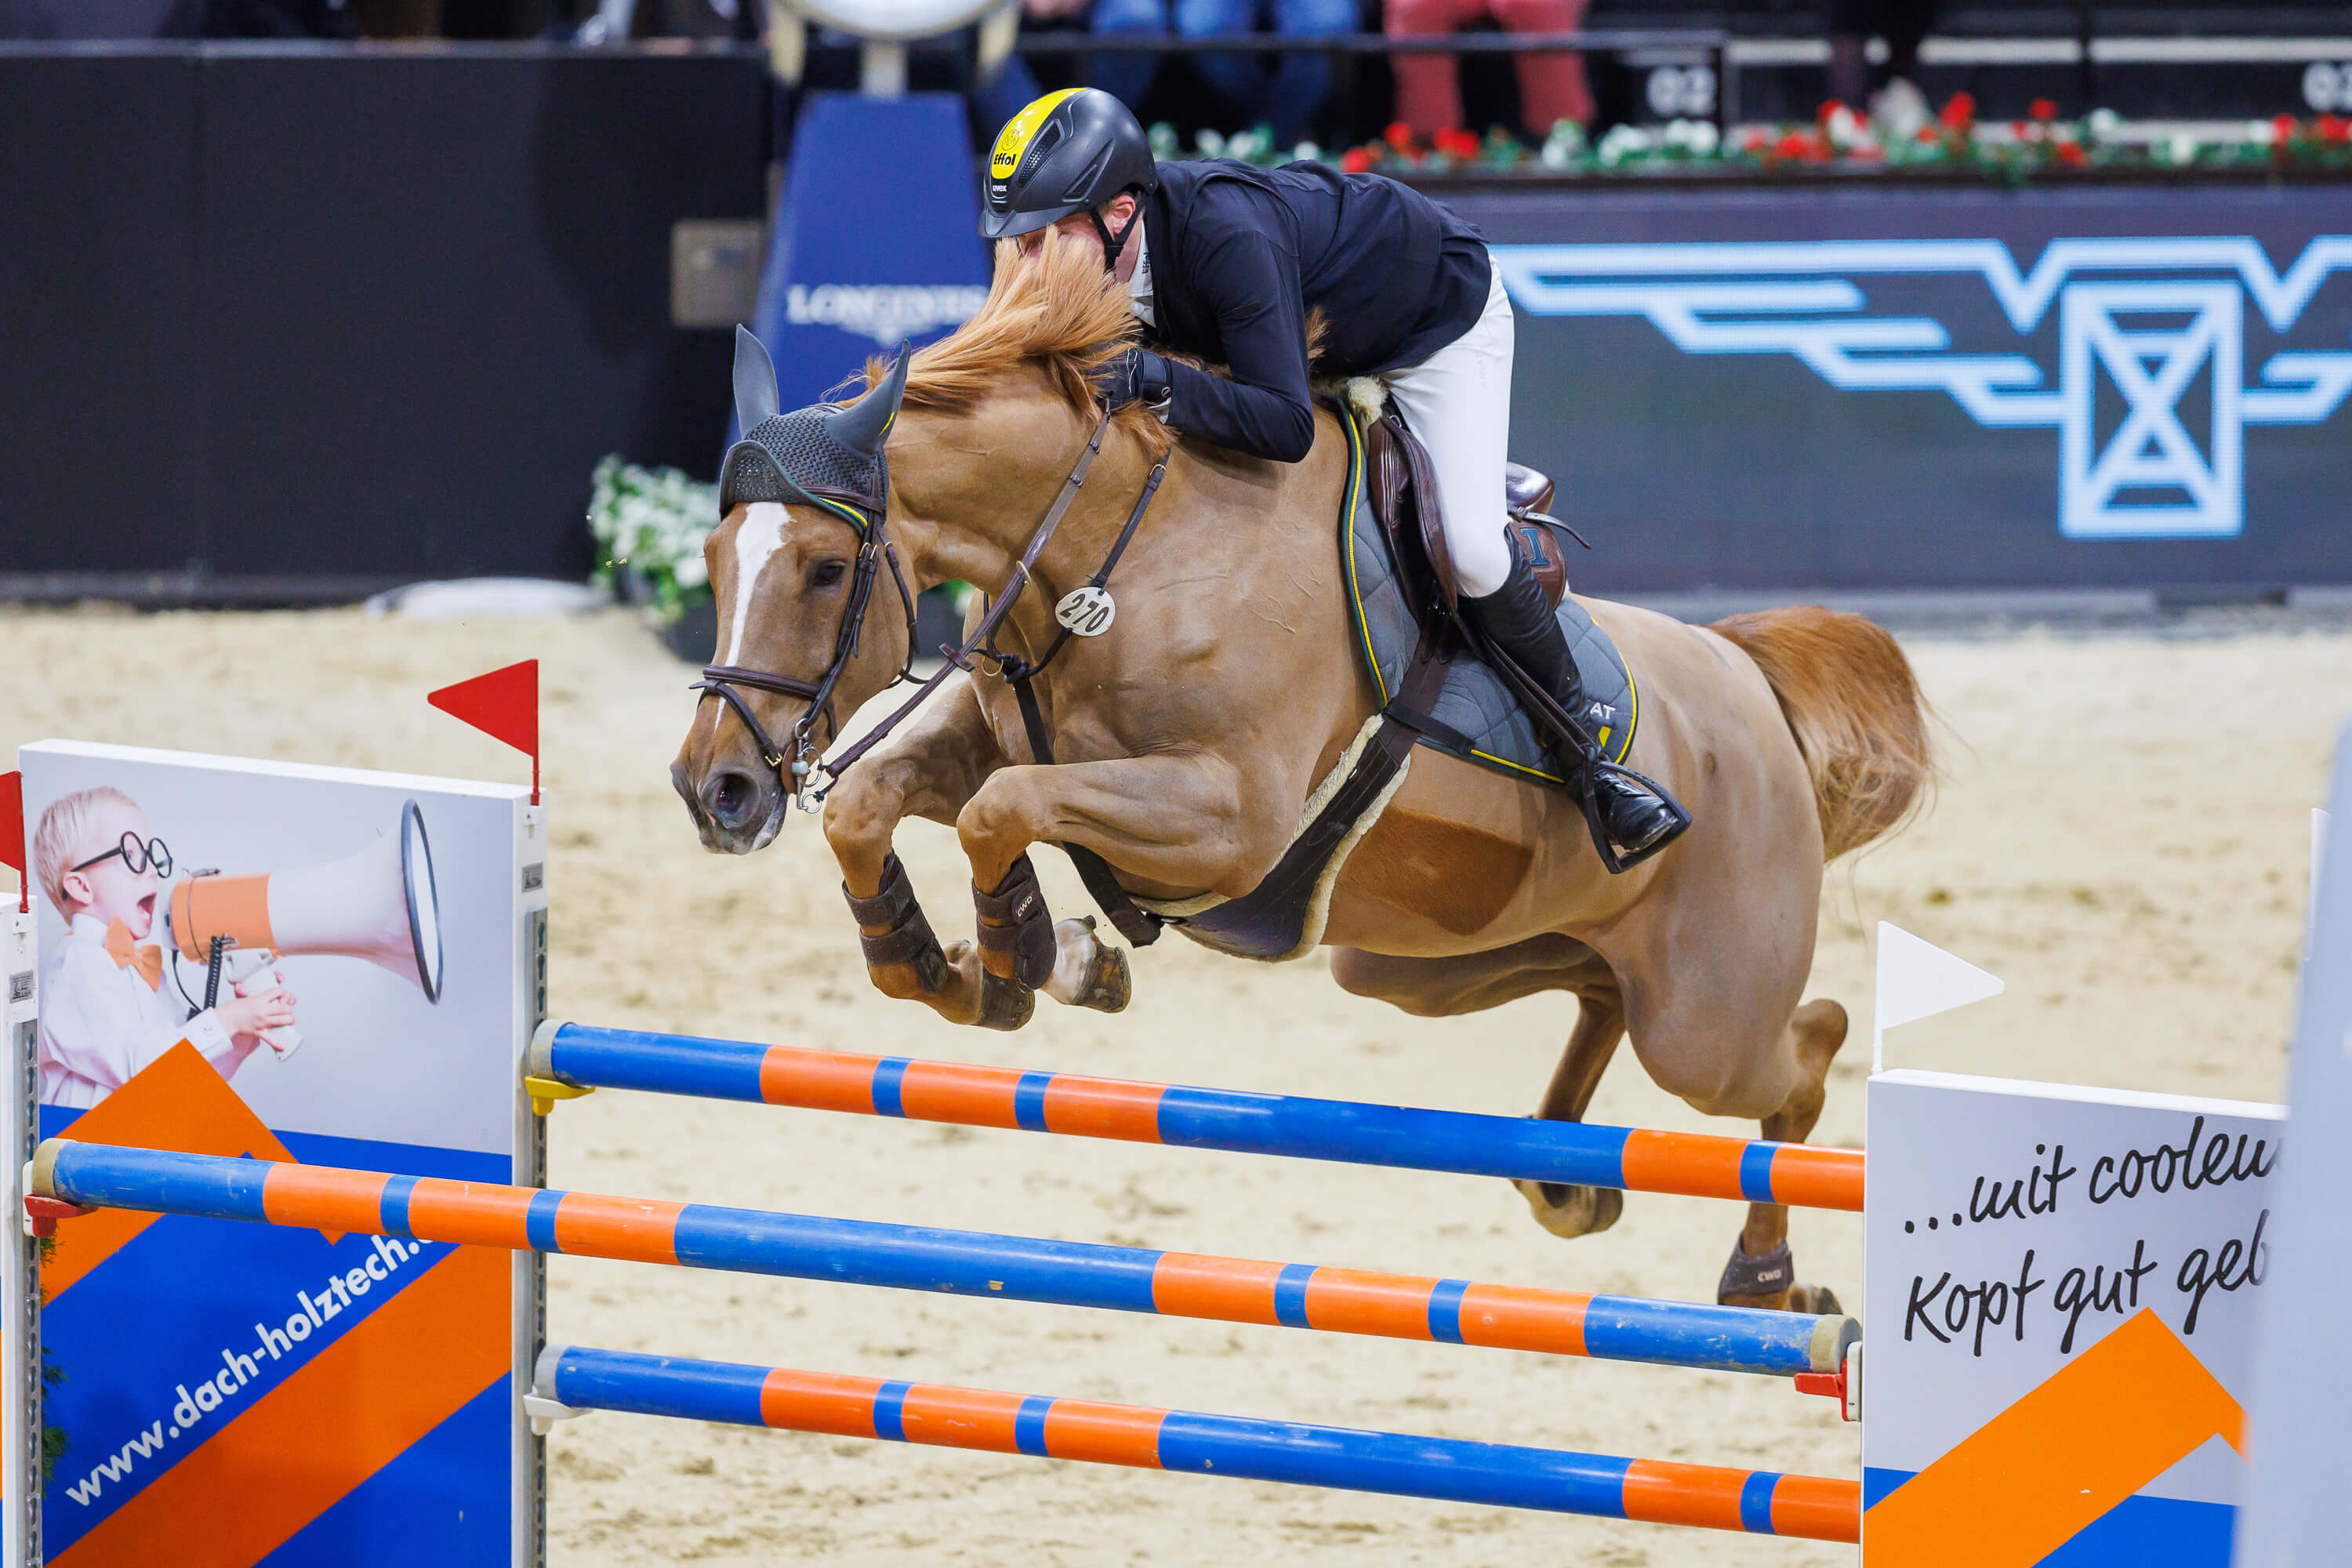 Philipp Schulze Topphoff jumps to gold in 5* 1.50m speed class at CHI Basel